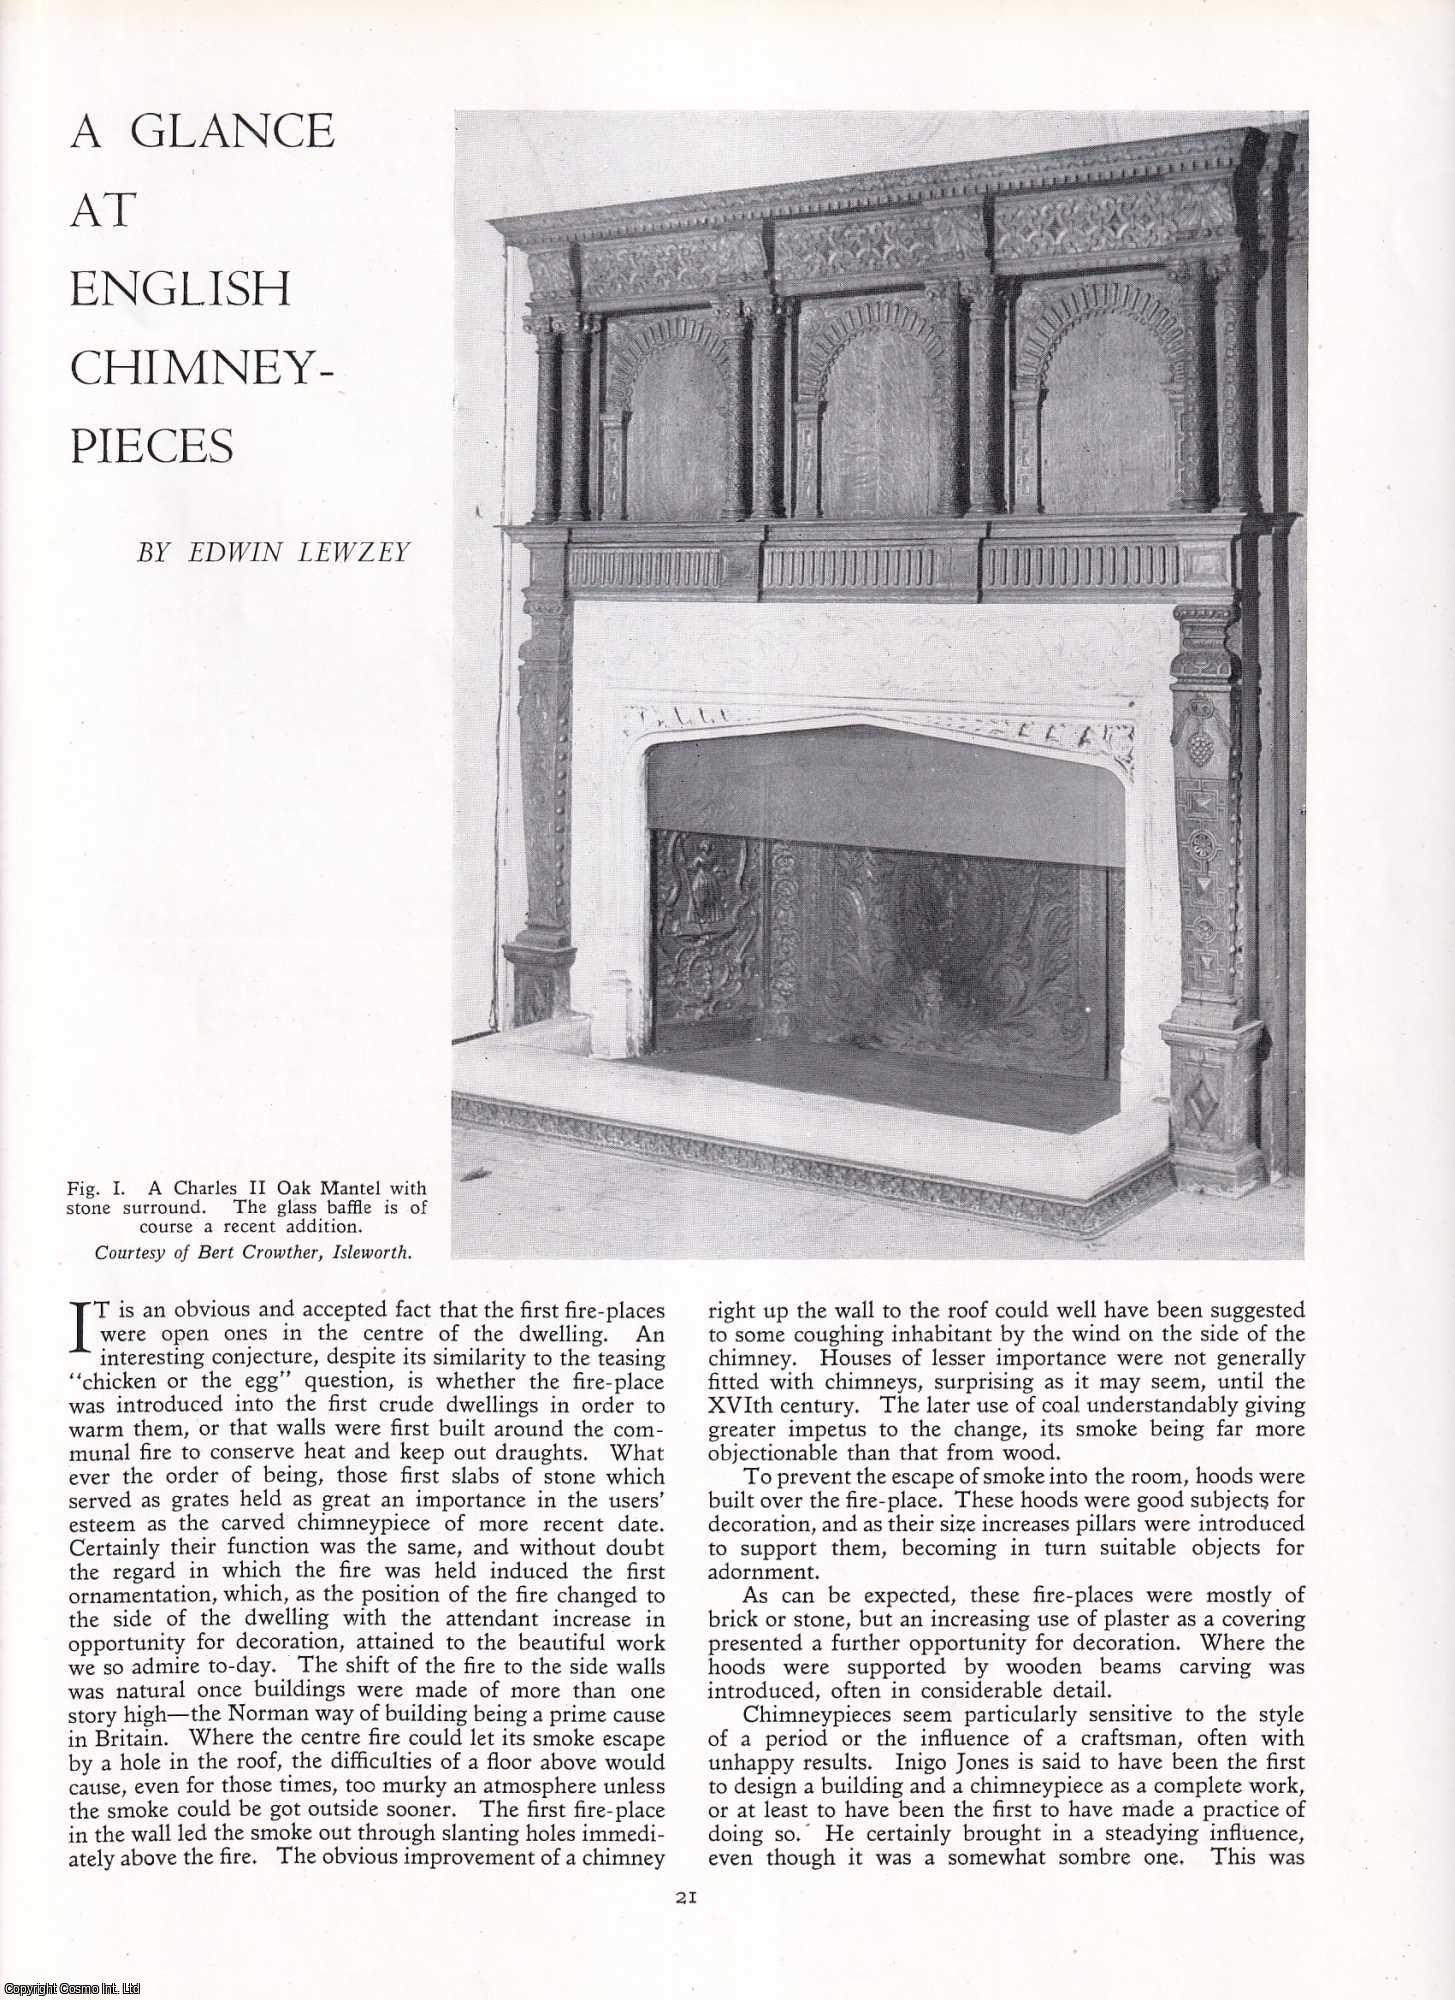 Edwin Lewzey - A Glance at English Chimney-Pieces. An original article from Apollo, International Magazine of the Arts, 1952.